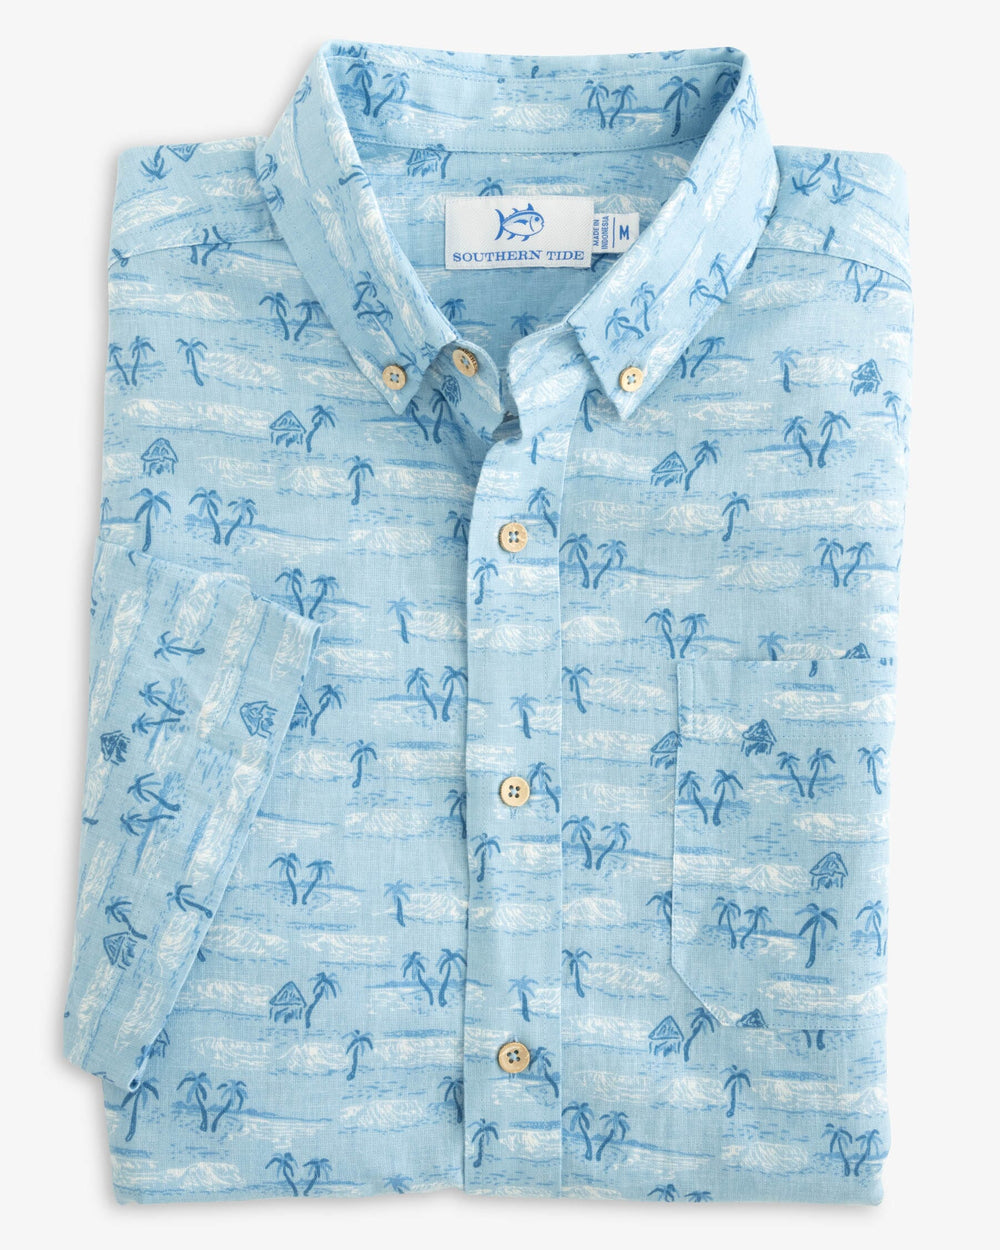 The folded view of the Southern Tide Nice to Sea You Printed Short Sleeve Button Down Shirt by Southern Tide - Rain Water